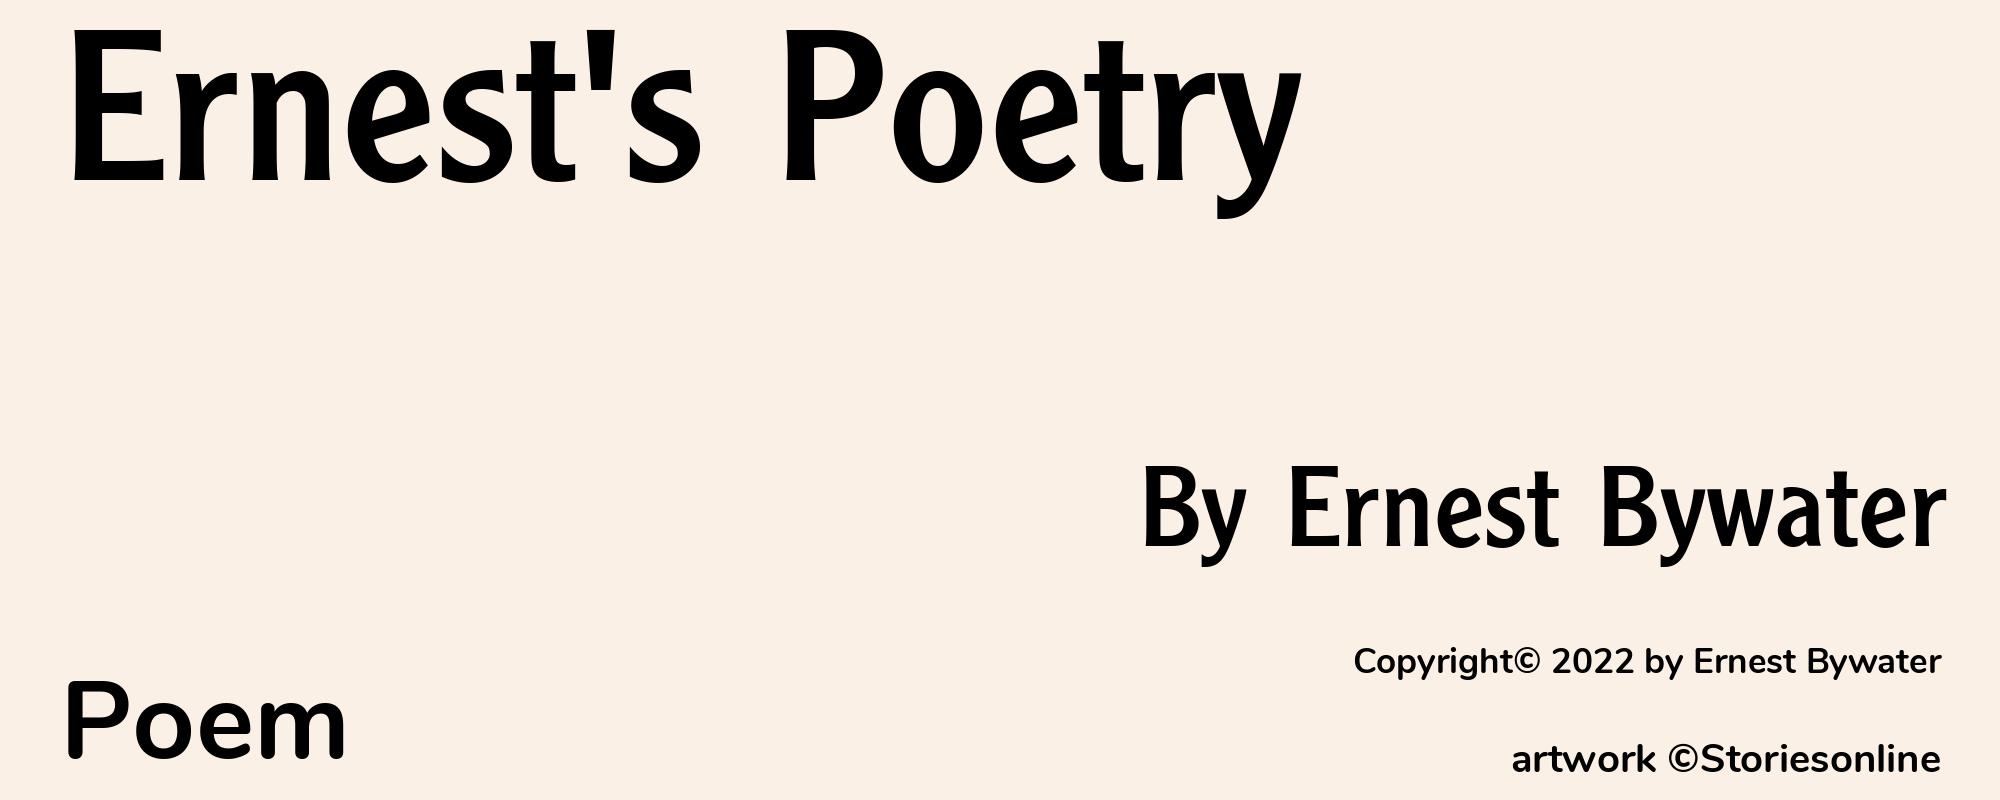 Ernest's Poetry - Cover